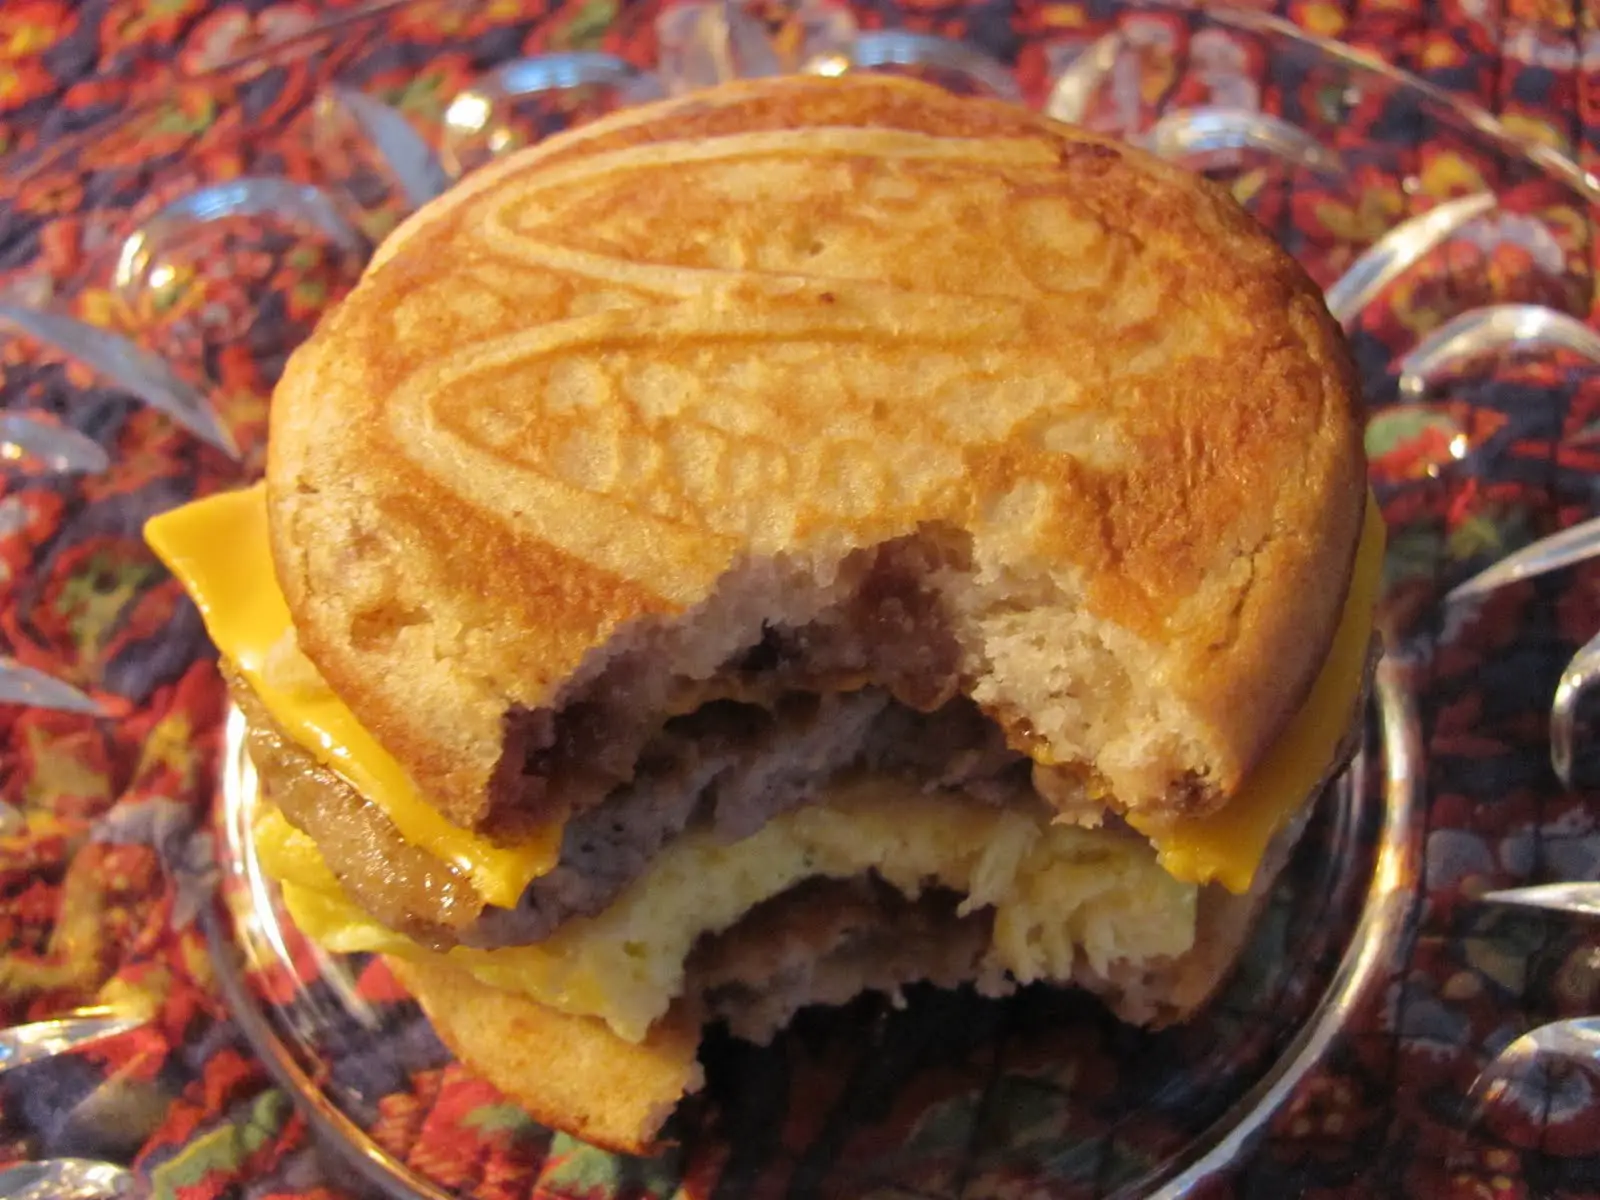 Foodette Reviews: Sausage, Egg and Cheese McGriddle